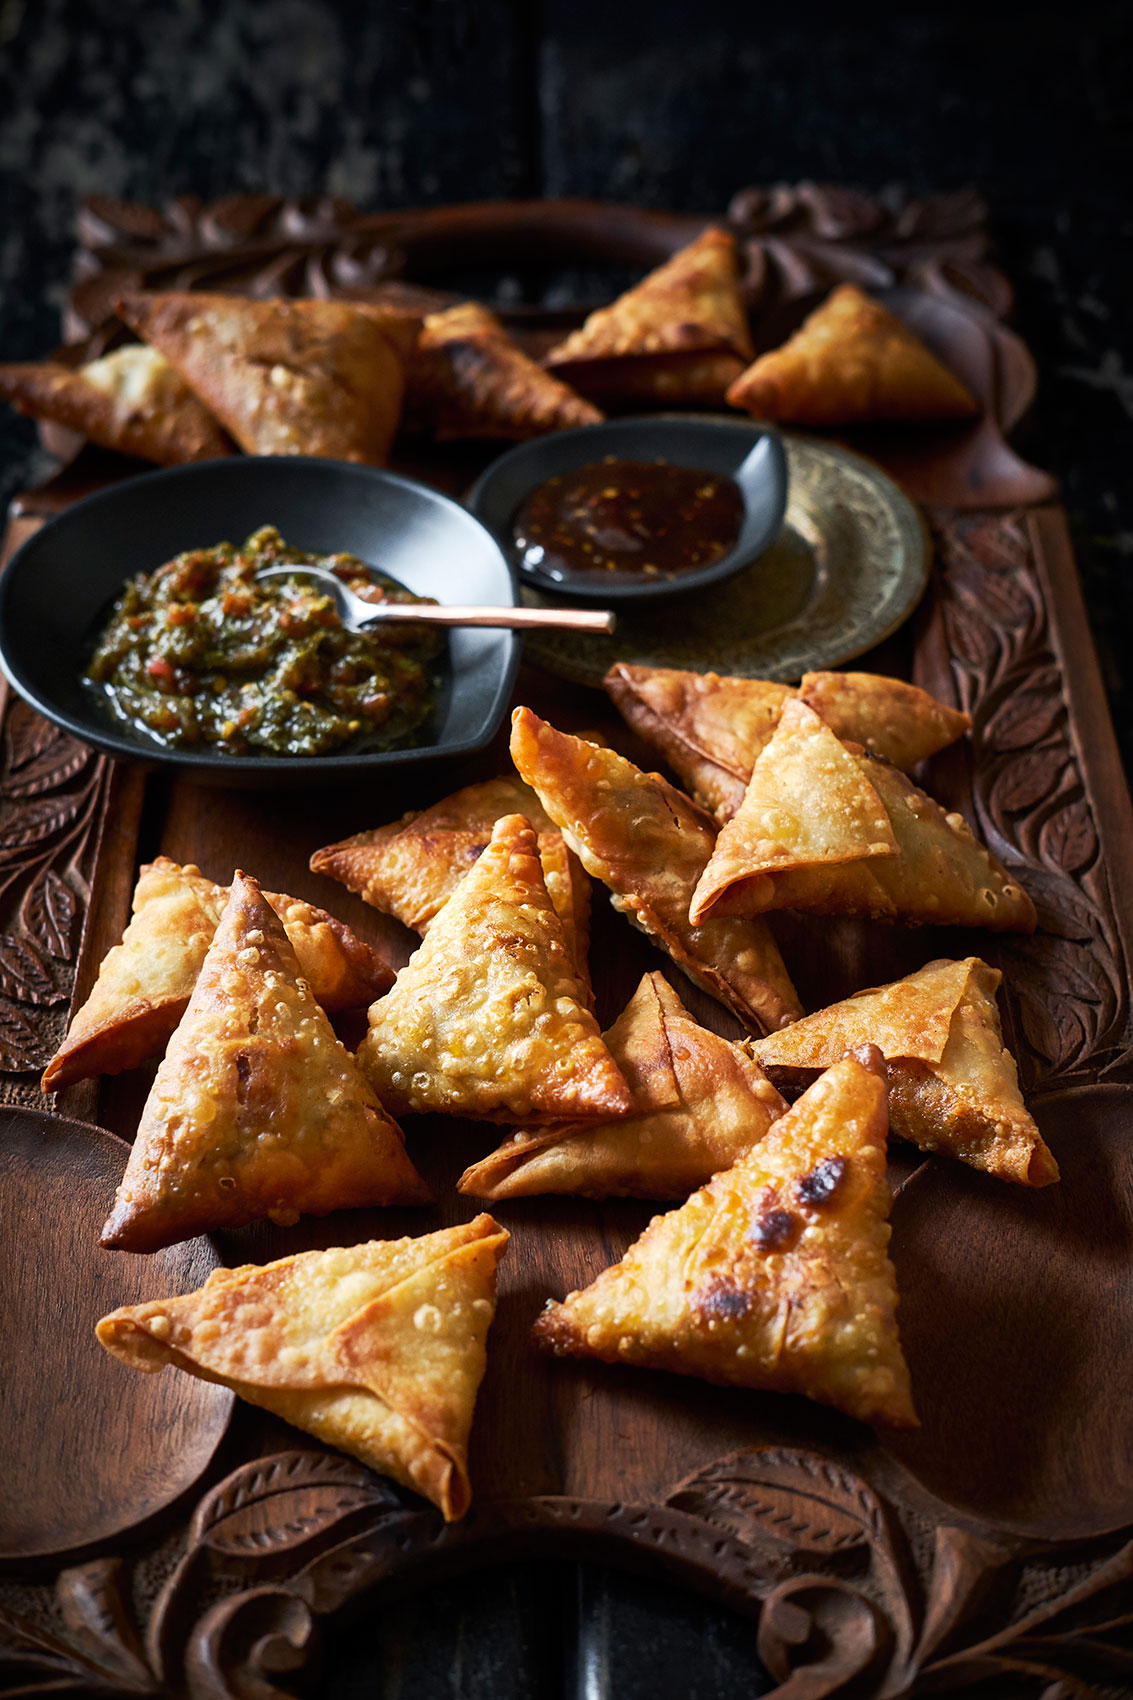 My Indian Kitchen • Fried Samosas with Dipping Sauces on Ornate Board • Cookbook & Editorial Food Photography